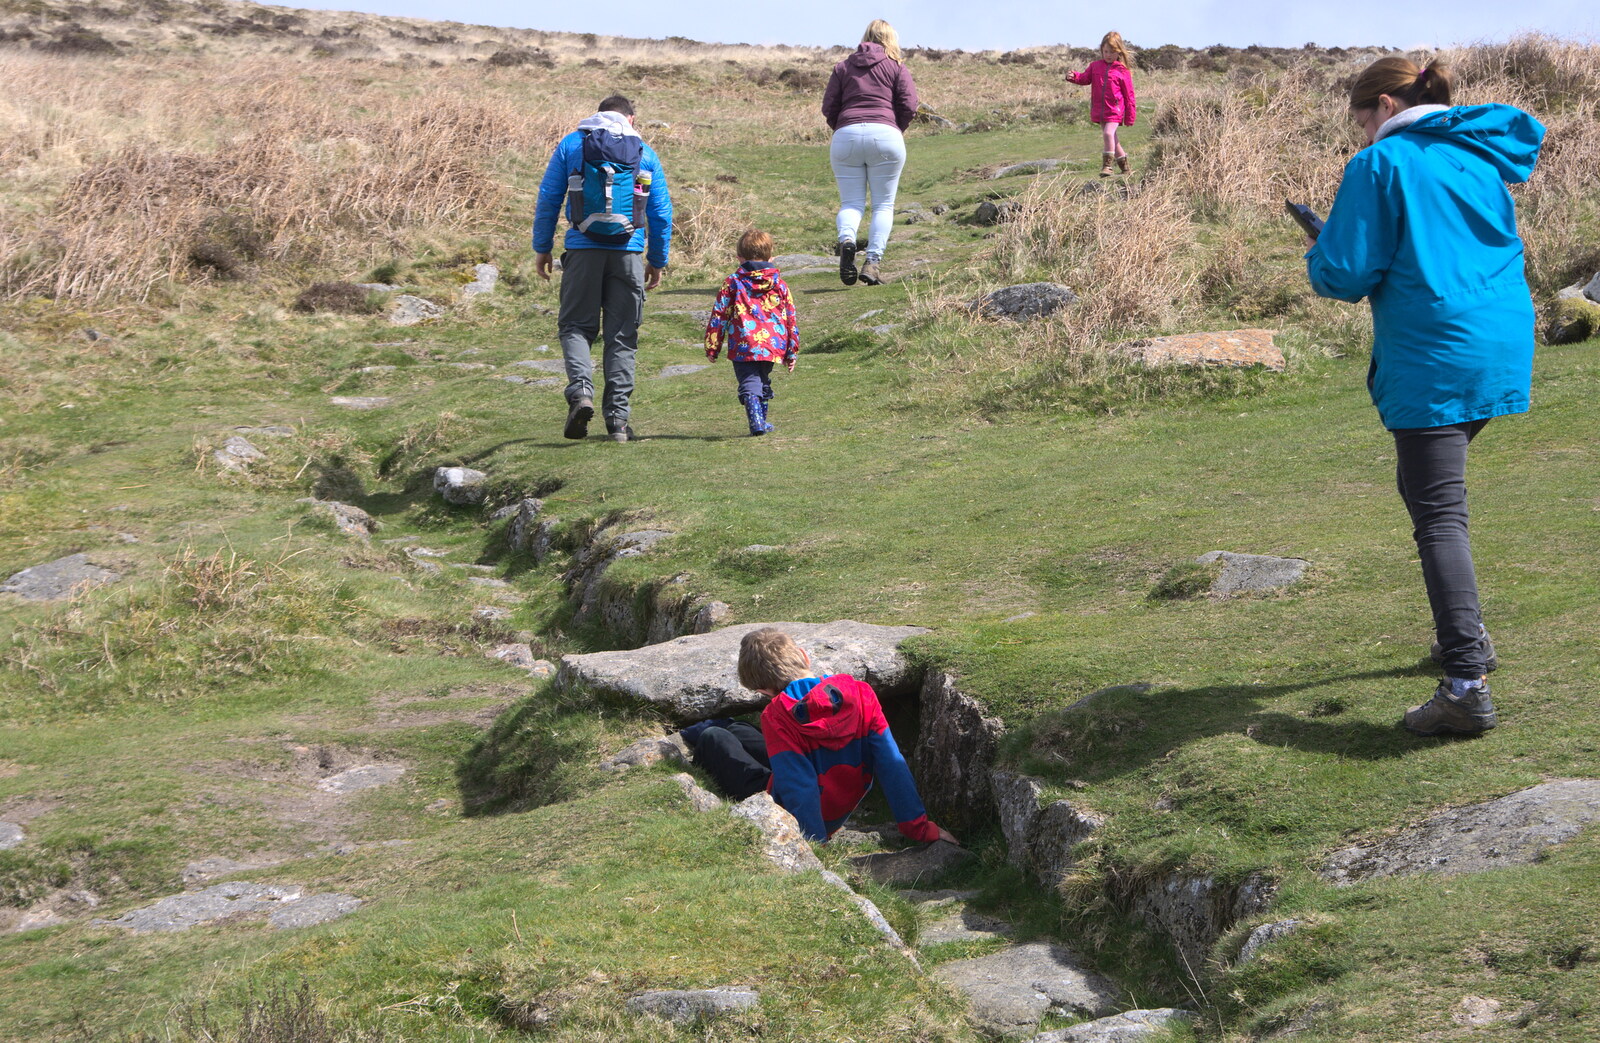 Fred messes around in an iron-age water course from A Barbeque, Grimspound and Pizza, Dartmoor and Exeter, Devon - 15th April 2017